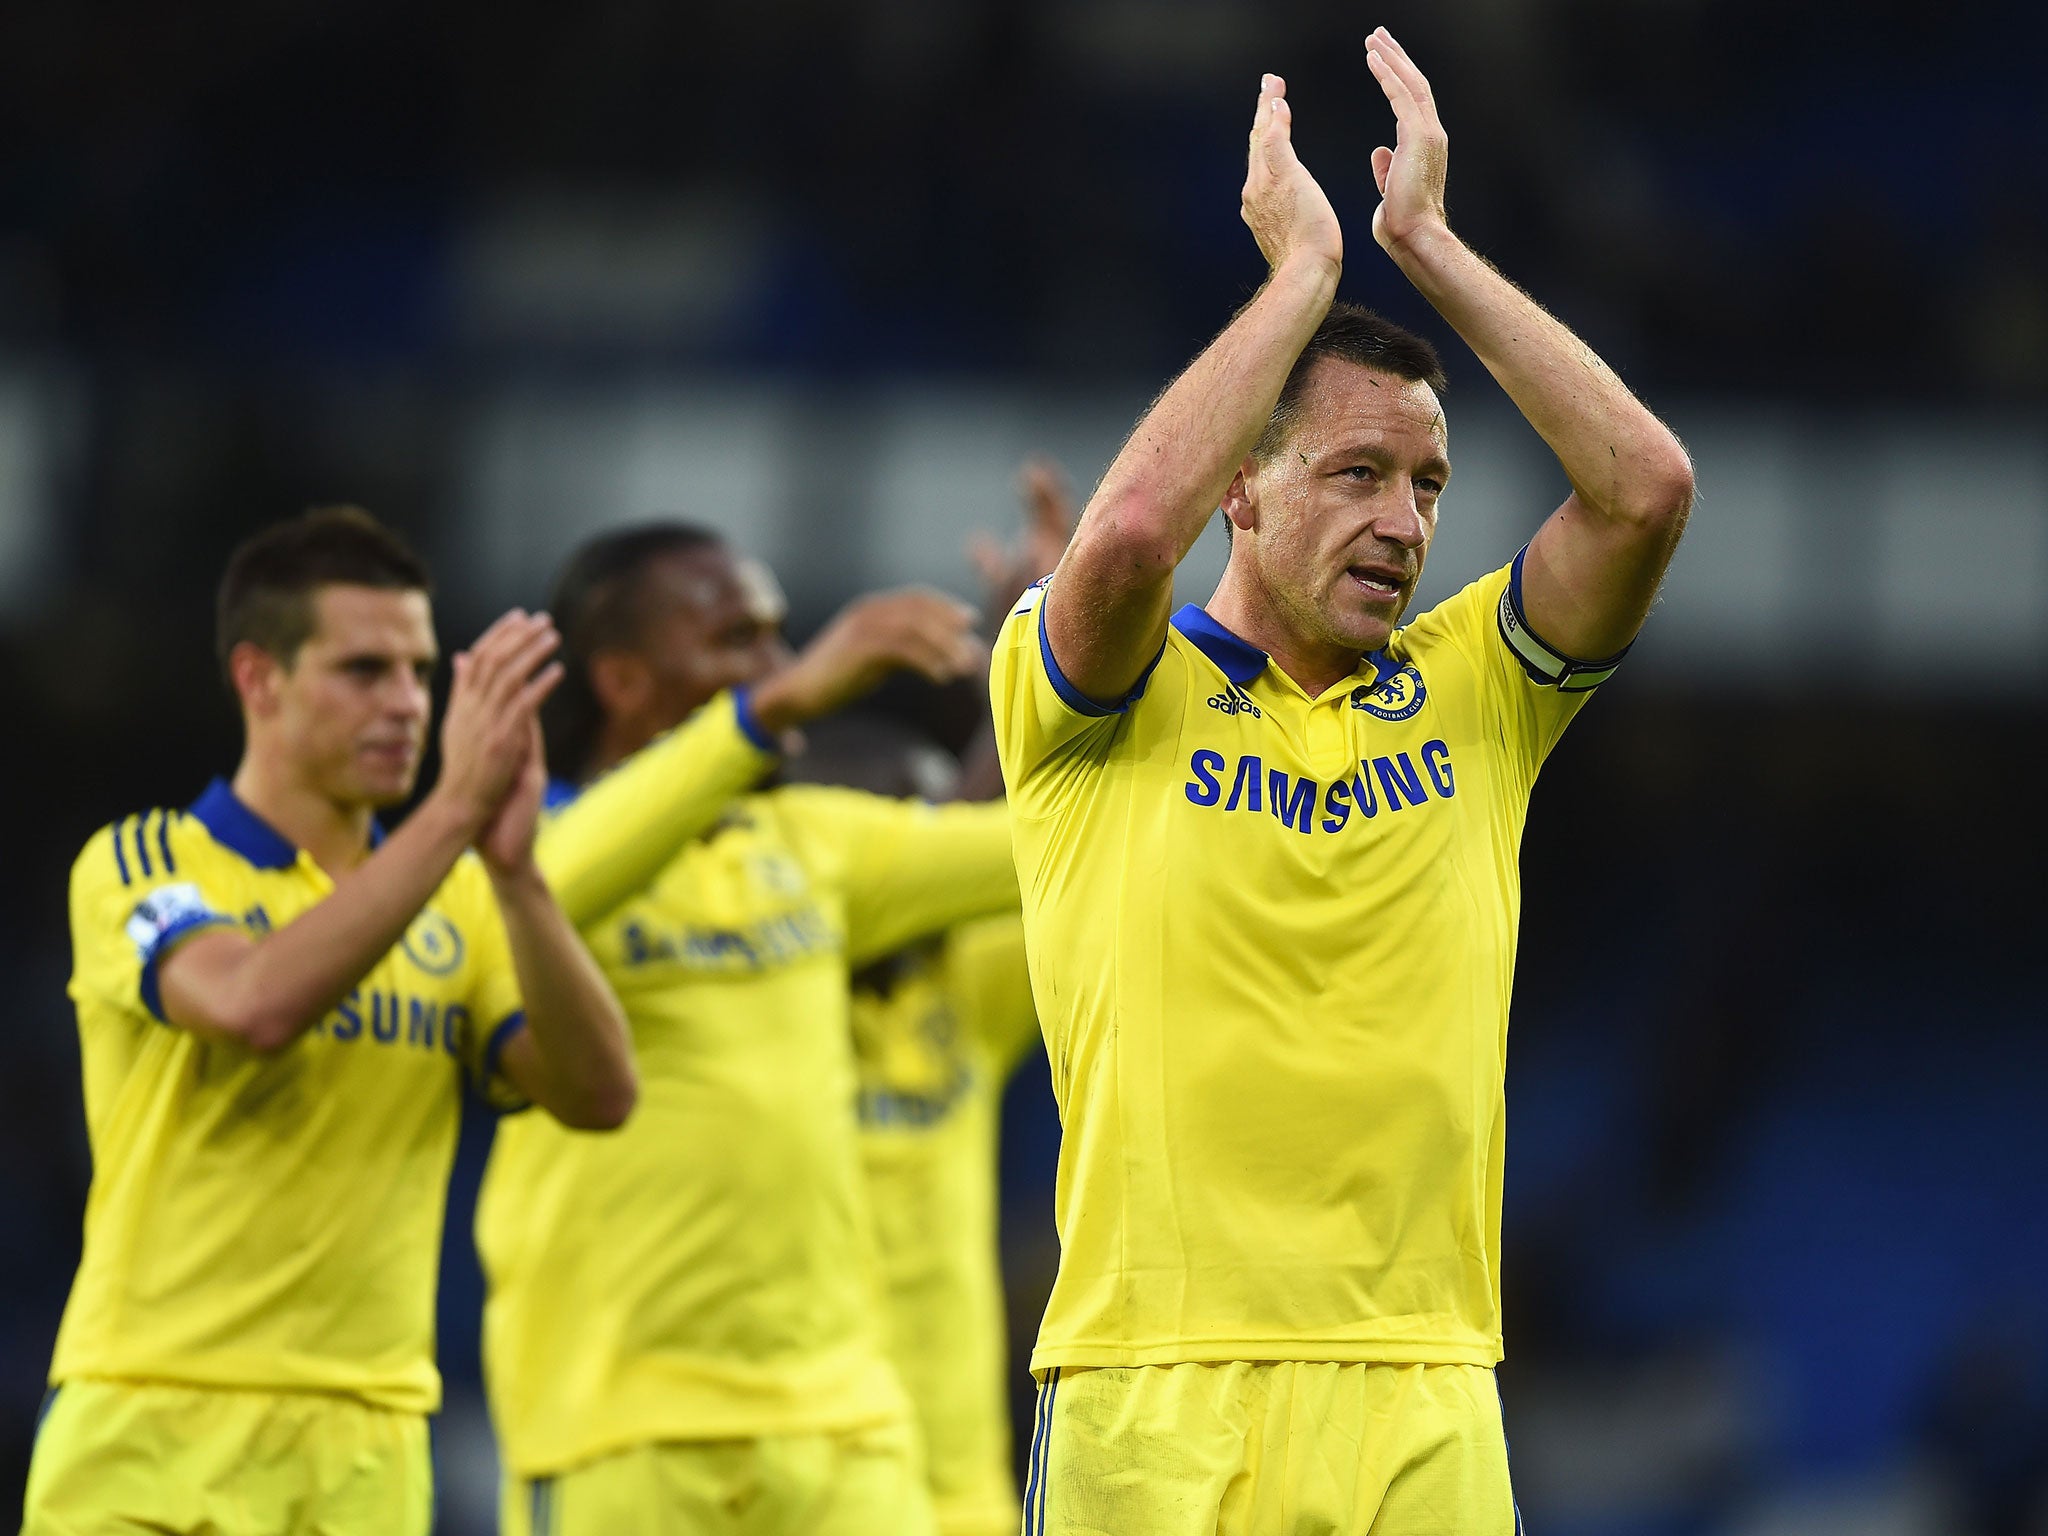 John Terry applauds the Chelsea fans after their 6-3 win at Everton